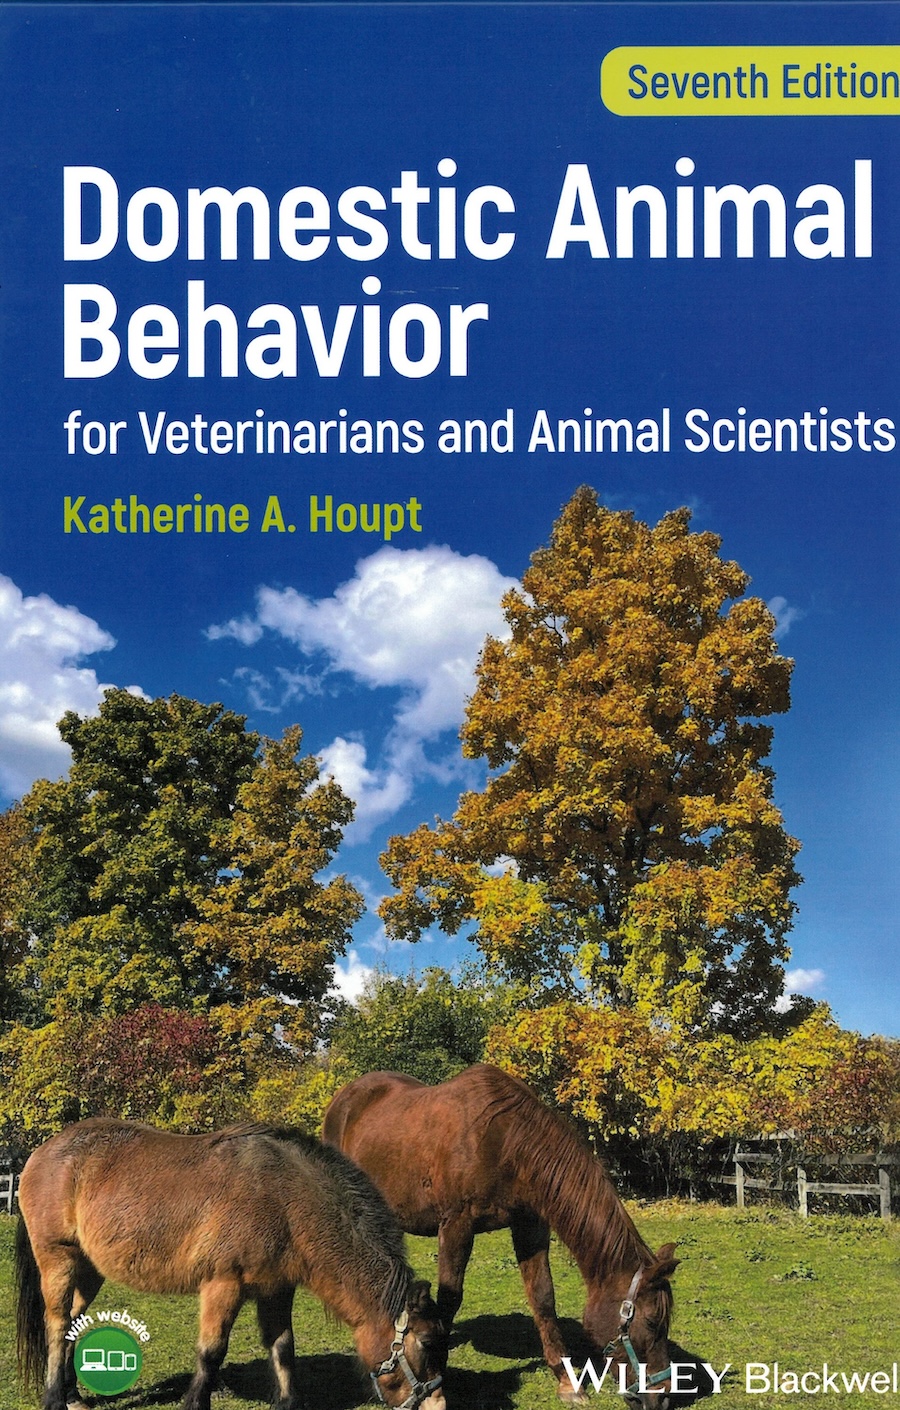 Domestic animal behavior for veterinarians and animal scientists